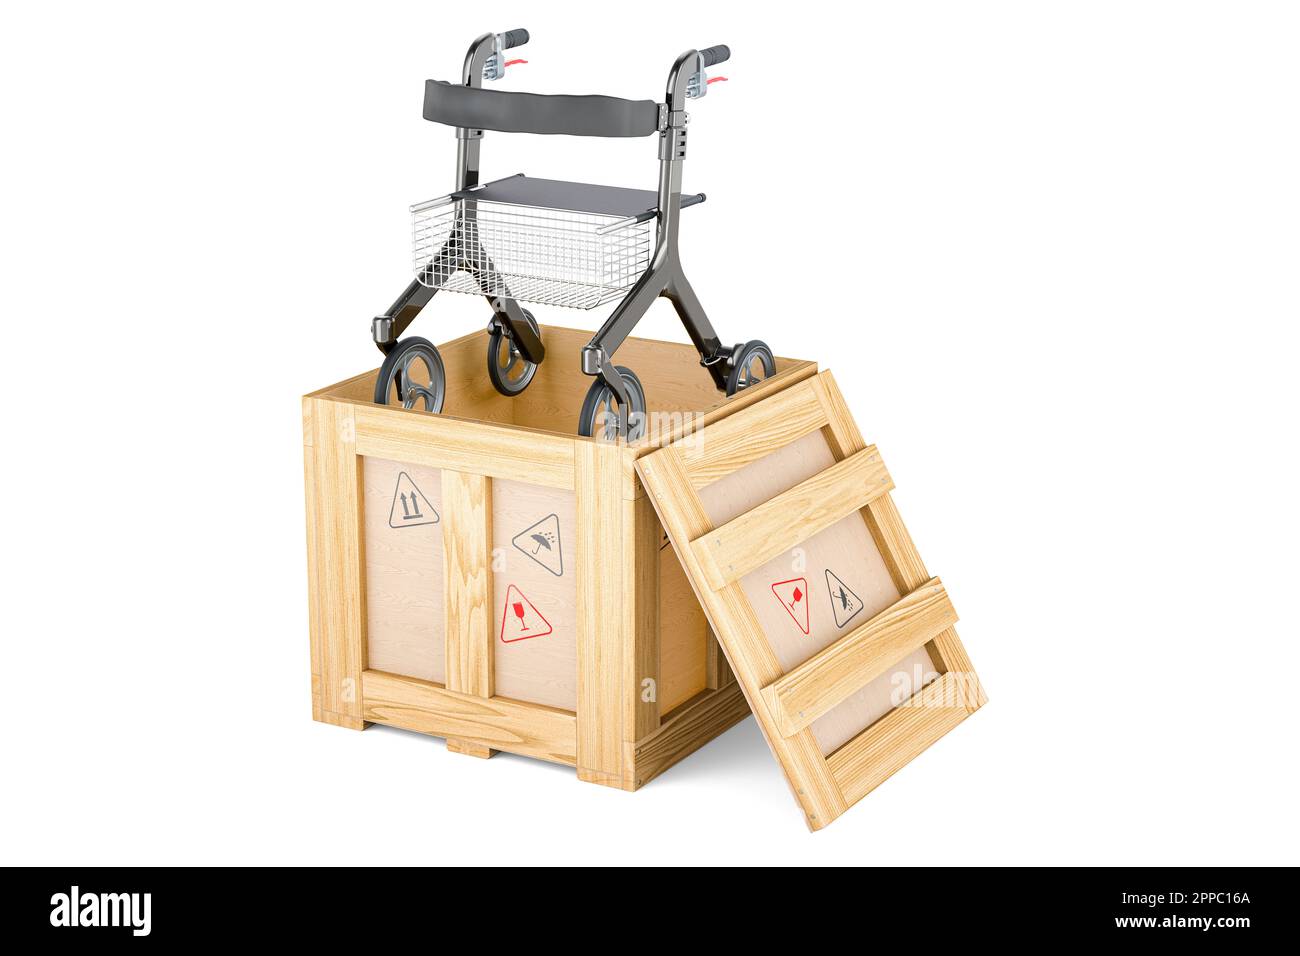 Rollator for elderly inside wooden box, delivery concept. 3D rendering isolated on white background Stock Photo